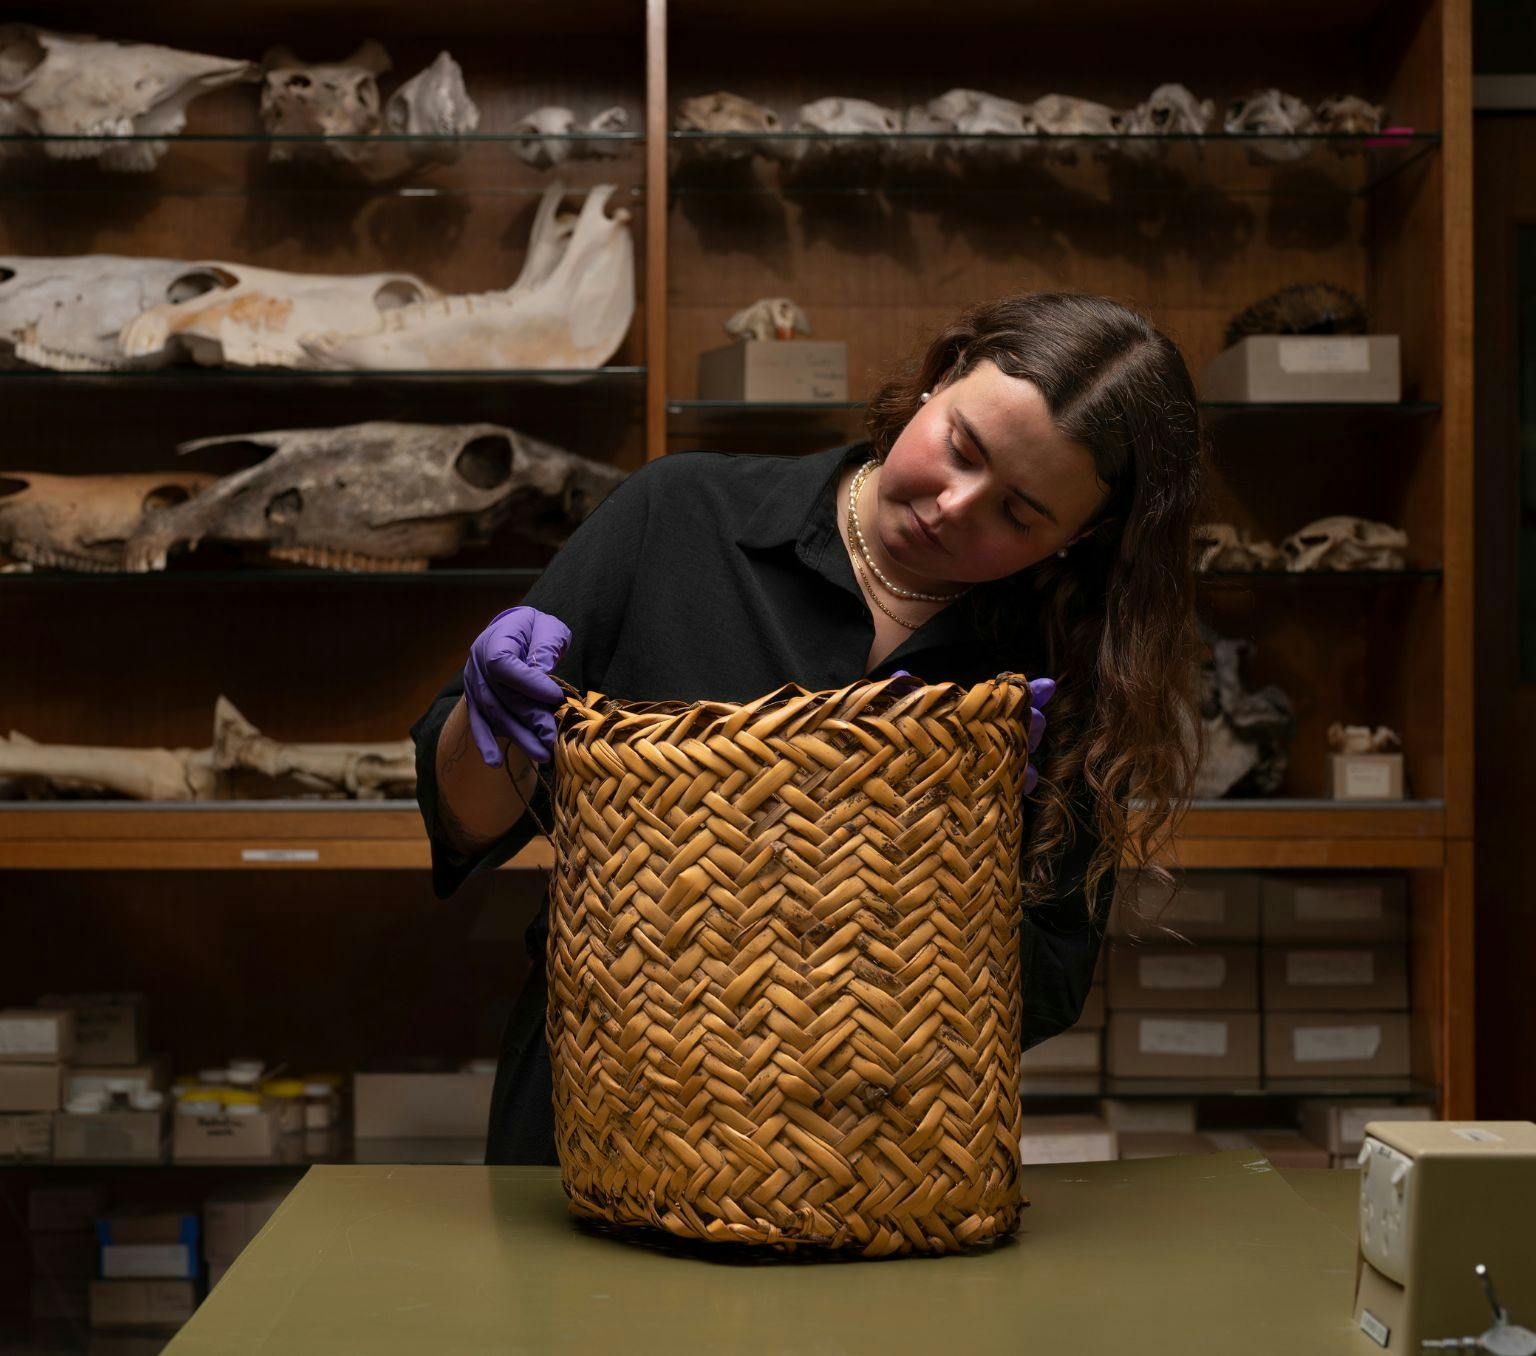 A woman wearing purple gloves gently touchers a large woven basket. On the shelves behind her are all sorts of objects including bones.